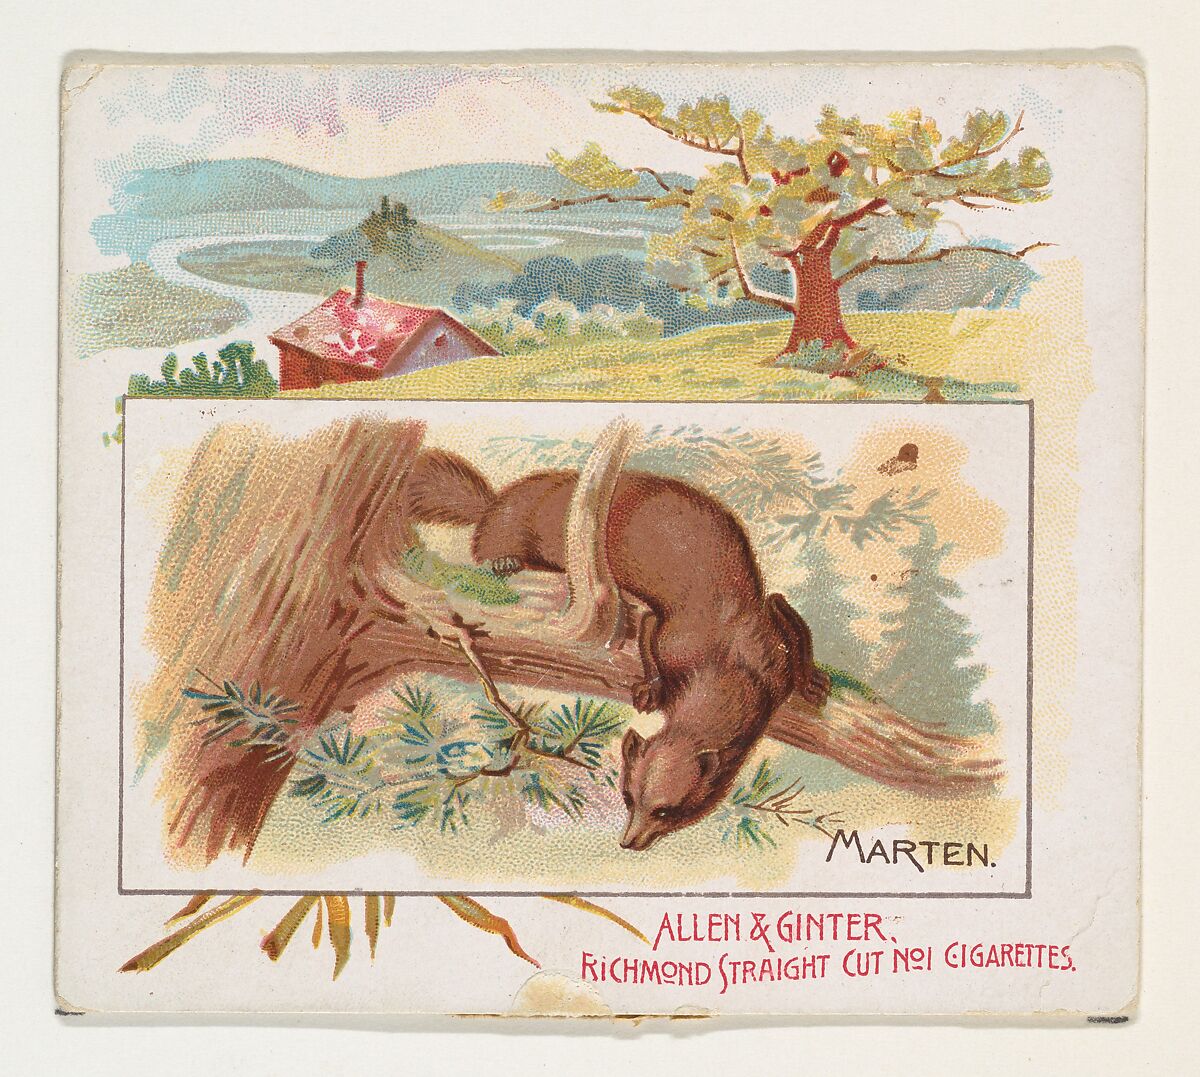 Marten, from Quadrupeds series (N41) for Allen & Ginter Cigarettes, Issued by Allen &amp; Ginter (American, Richmond, Virginia), Commercial color lithograph 